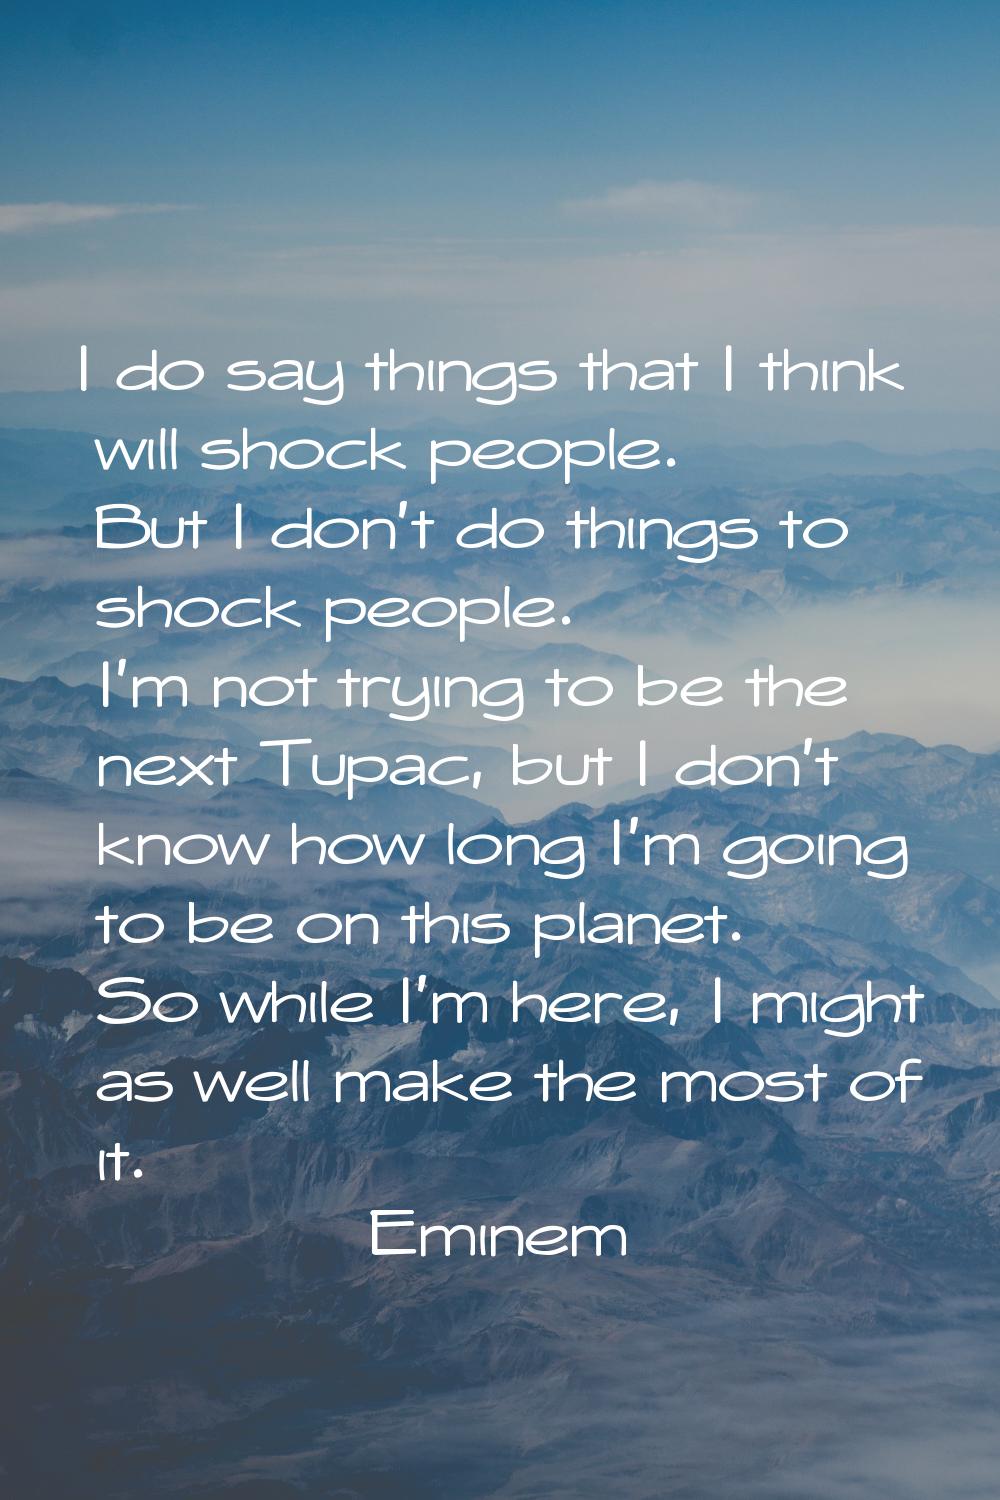 I do say things that I think will shock people. But I don't do things to shock people. I'm not tryi